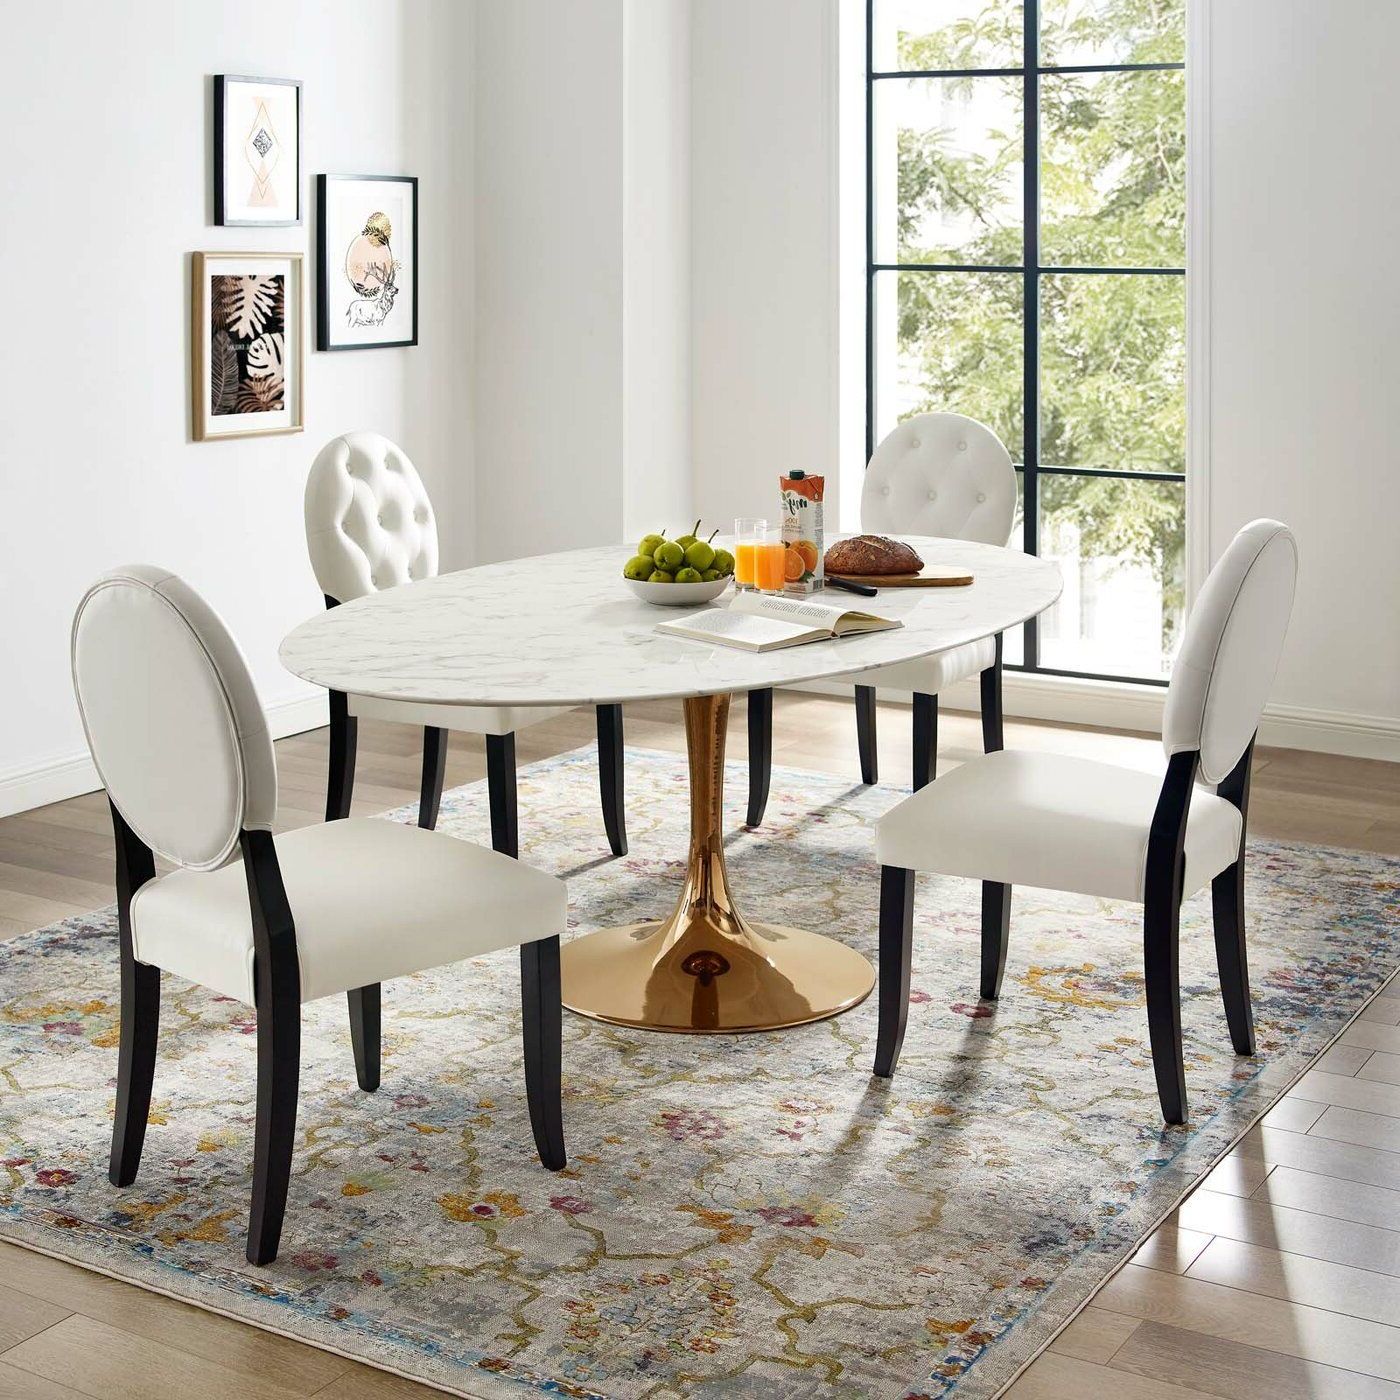 Chapman Marble Oval Dining Tables Intended For Most Recently Released Kylee Artificial Marble Oval Shaped Dining Table (View 6 of 25)